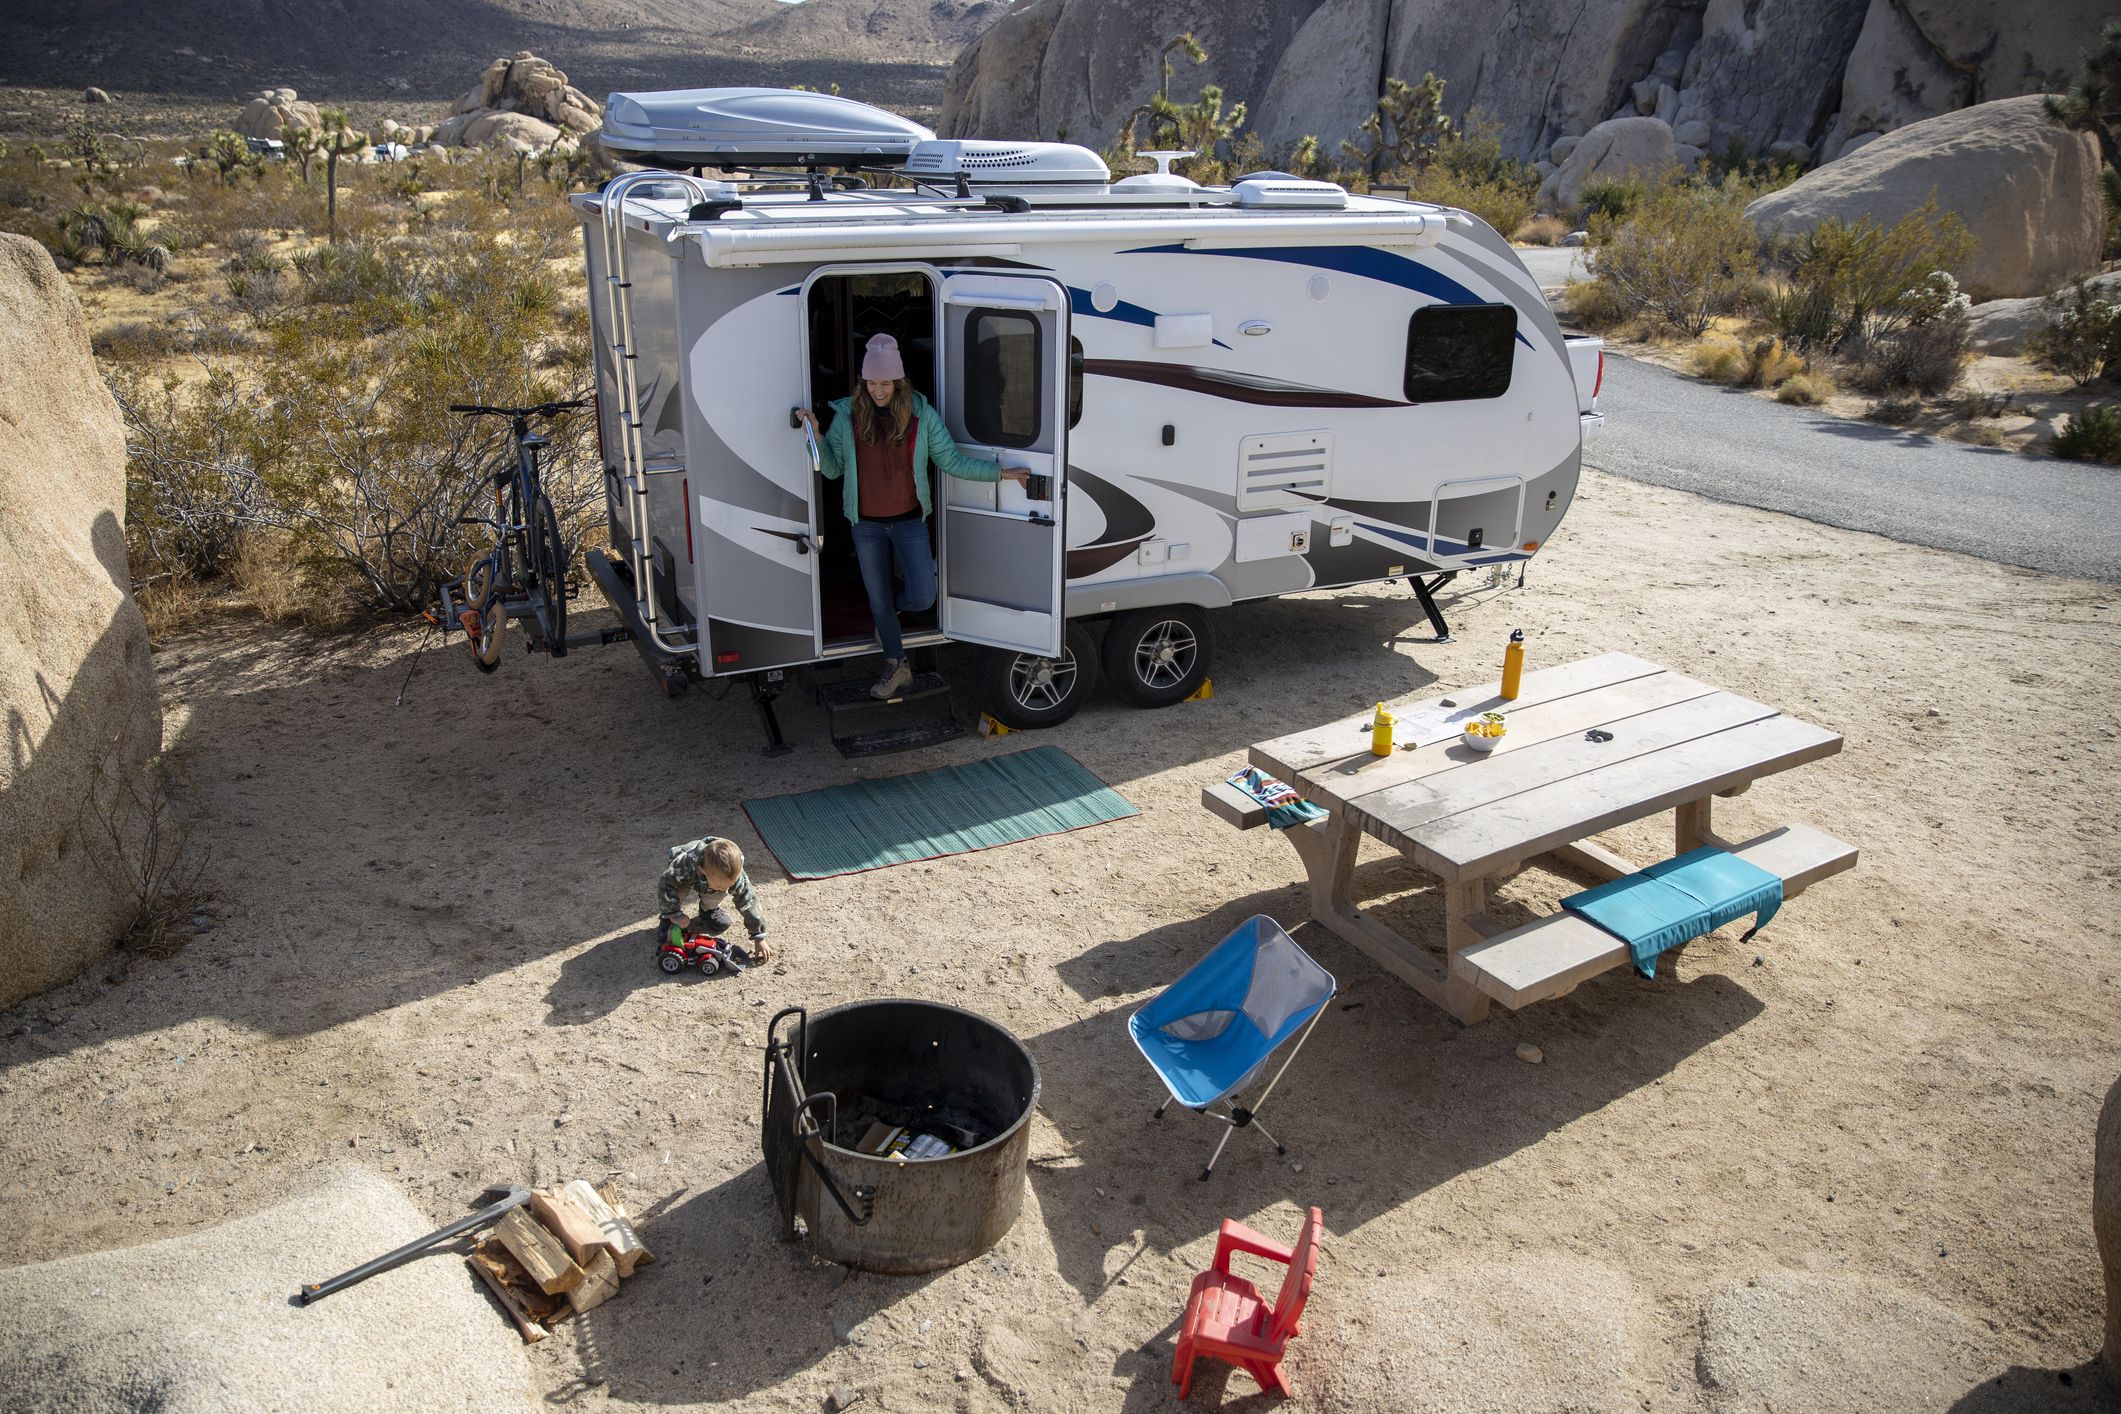 RV Rentals Are Popular Social-Distancing Choice for Summer Travel